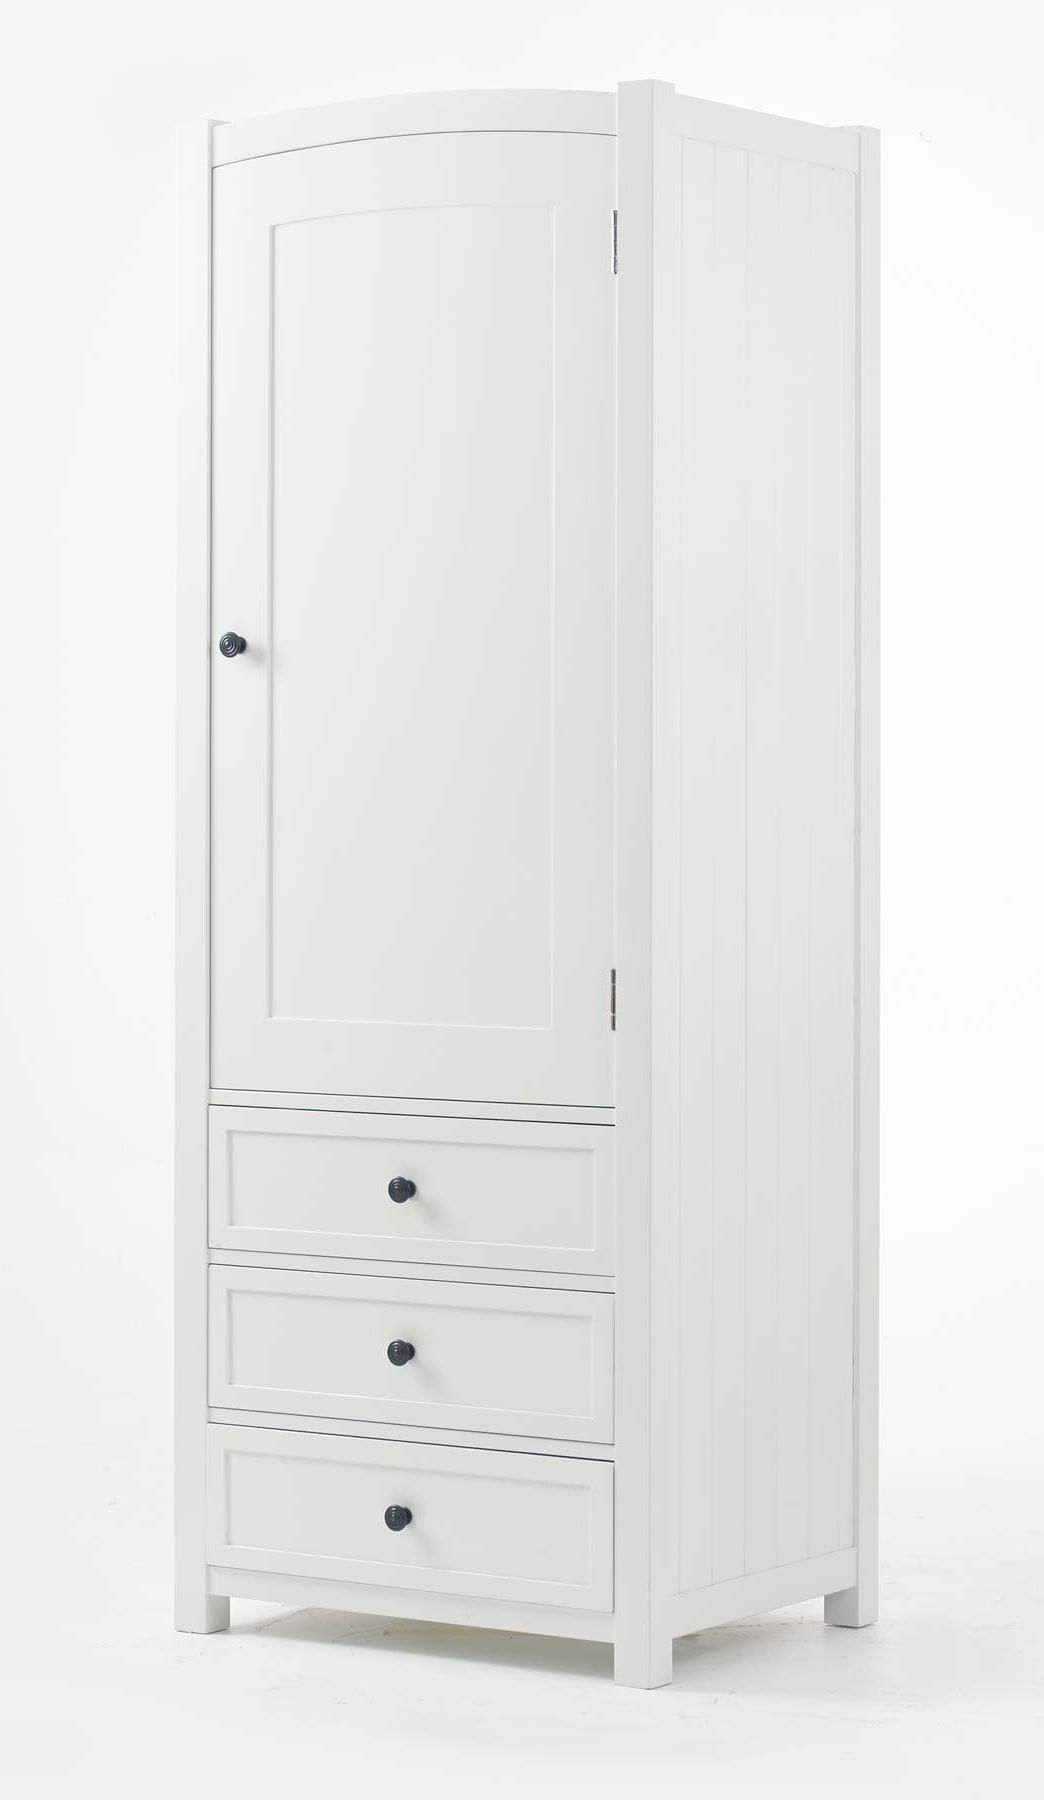 Popular Single White Wardrobes With Drawers With Childs White Wardrobe With Drawers • Drawer Ideas (View 9 of 15)